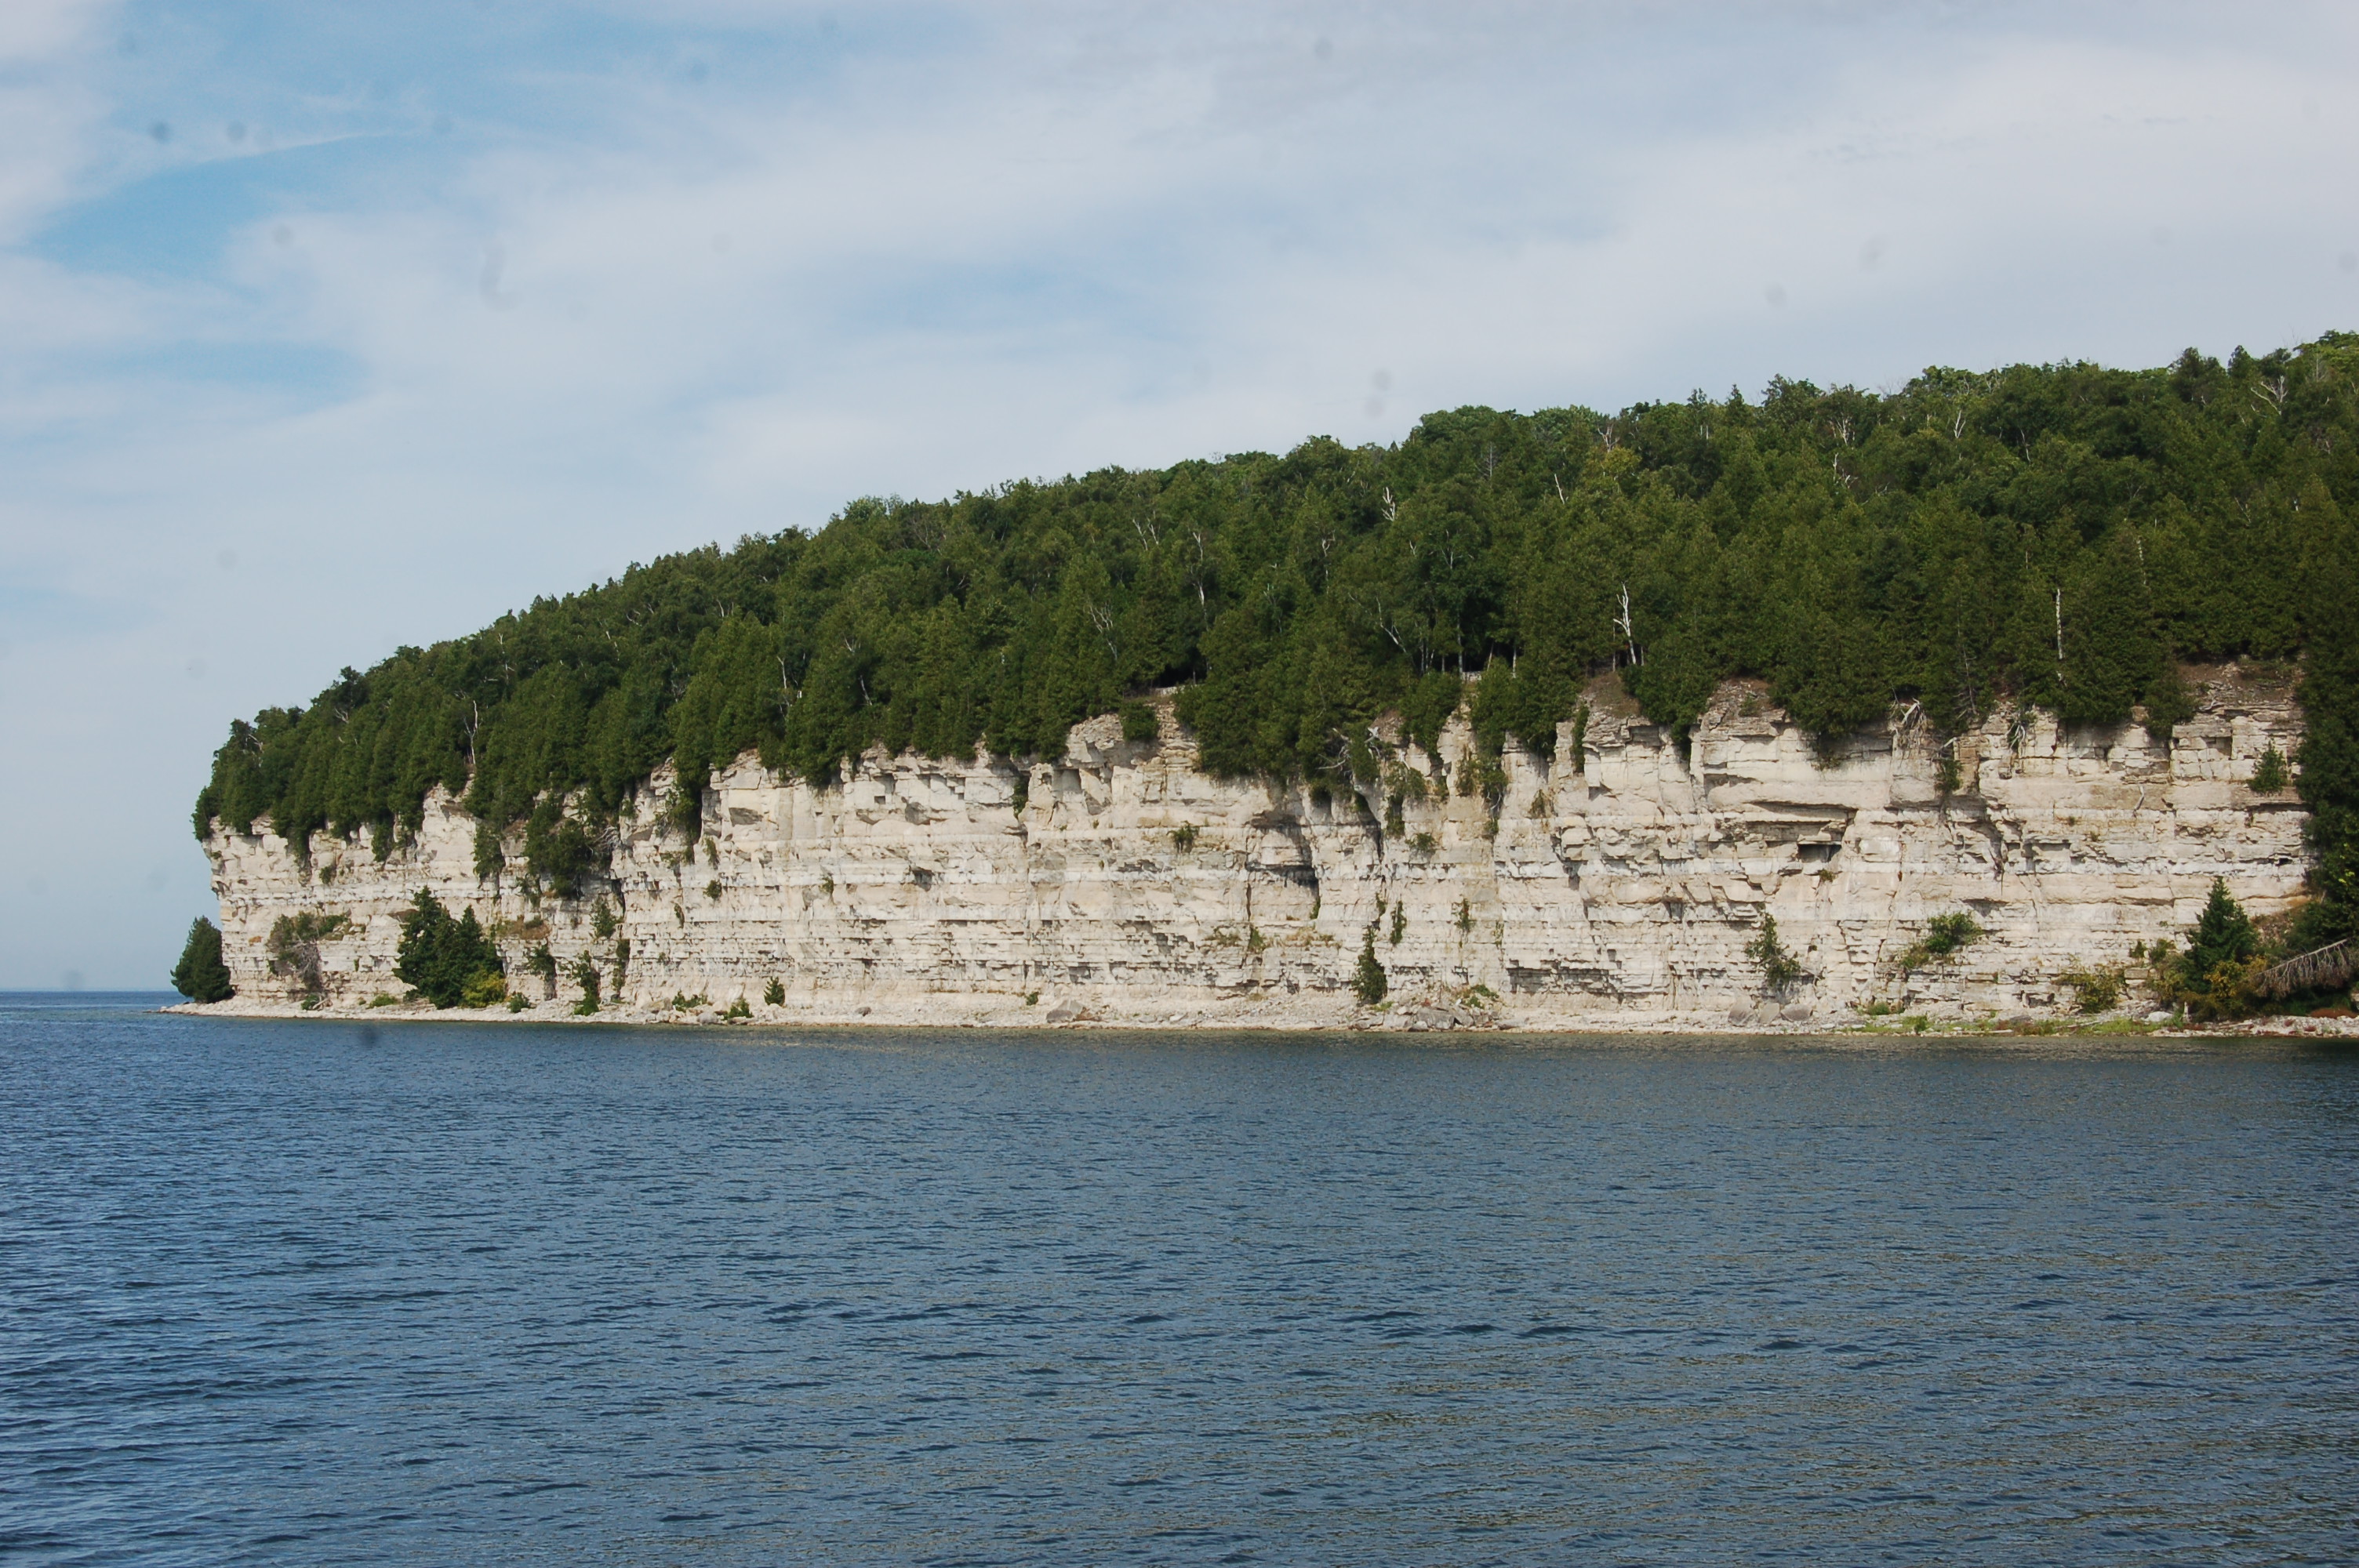 A closer view of the limestone cliff